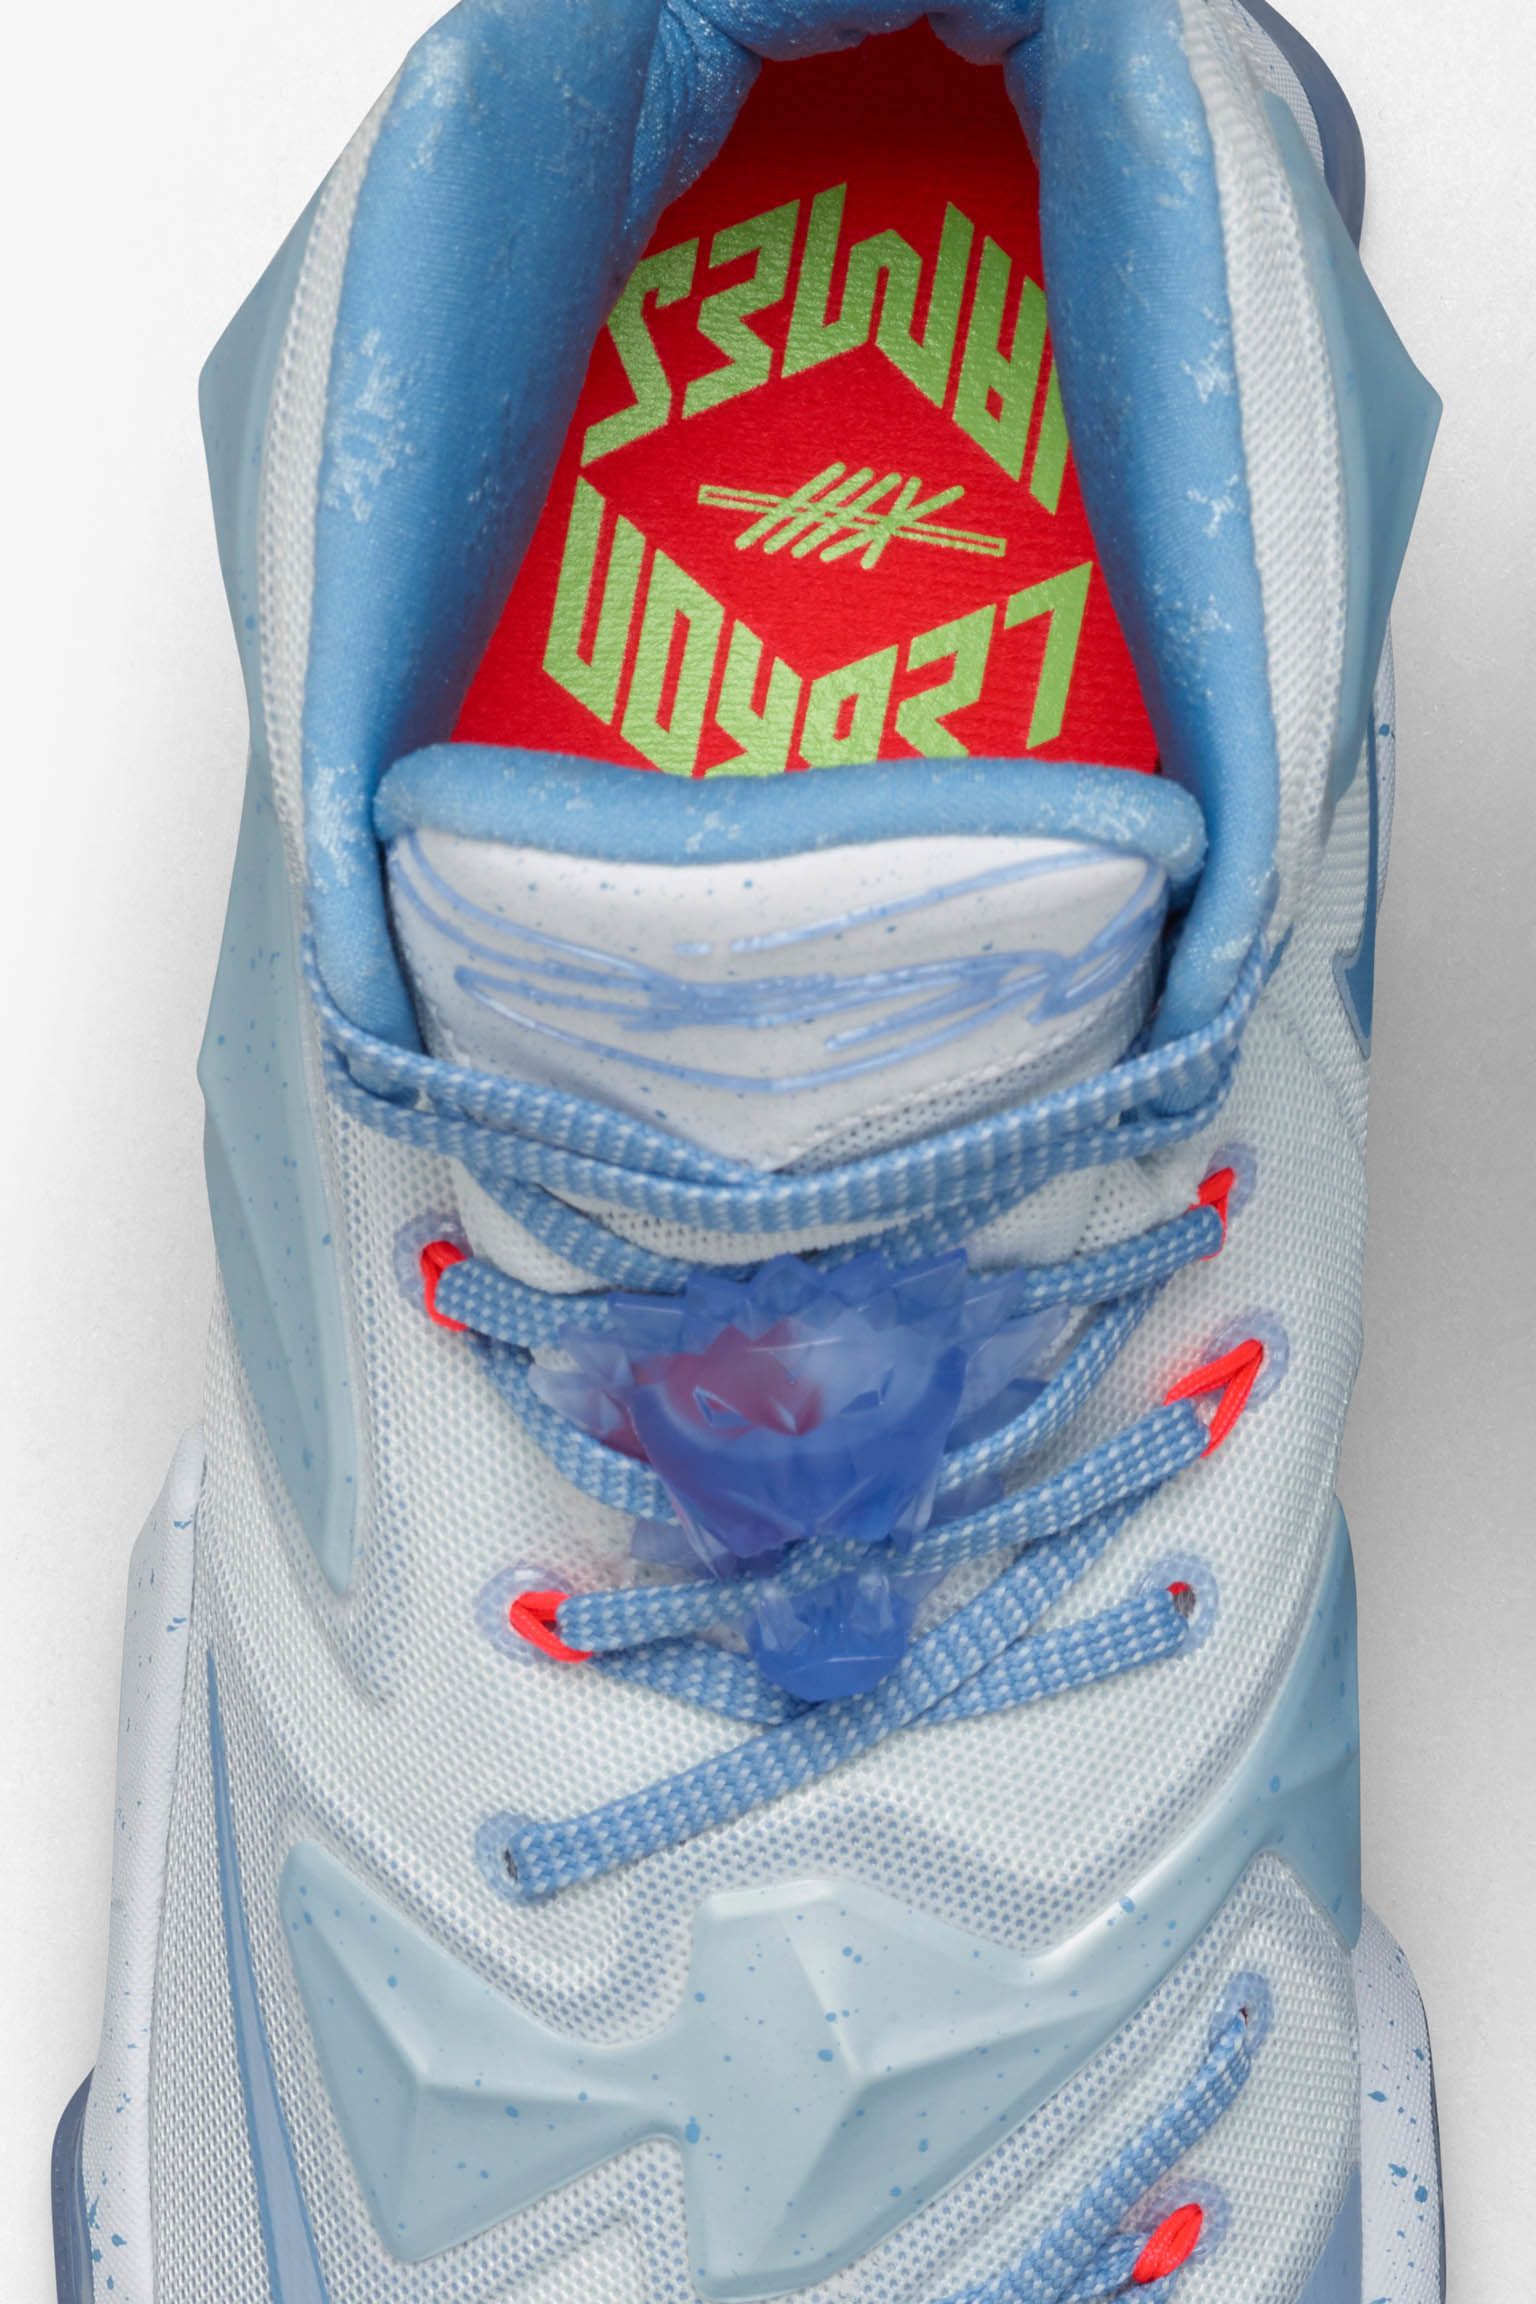 lebron fire and ice shoes